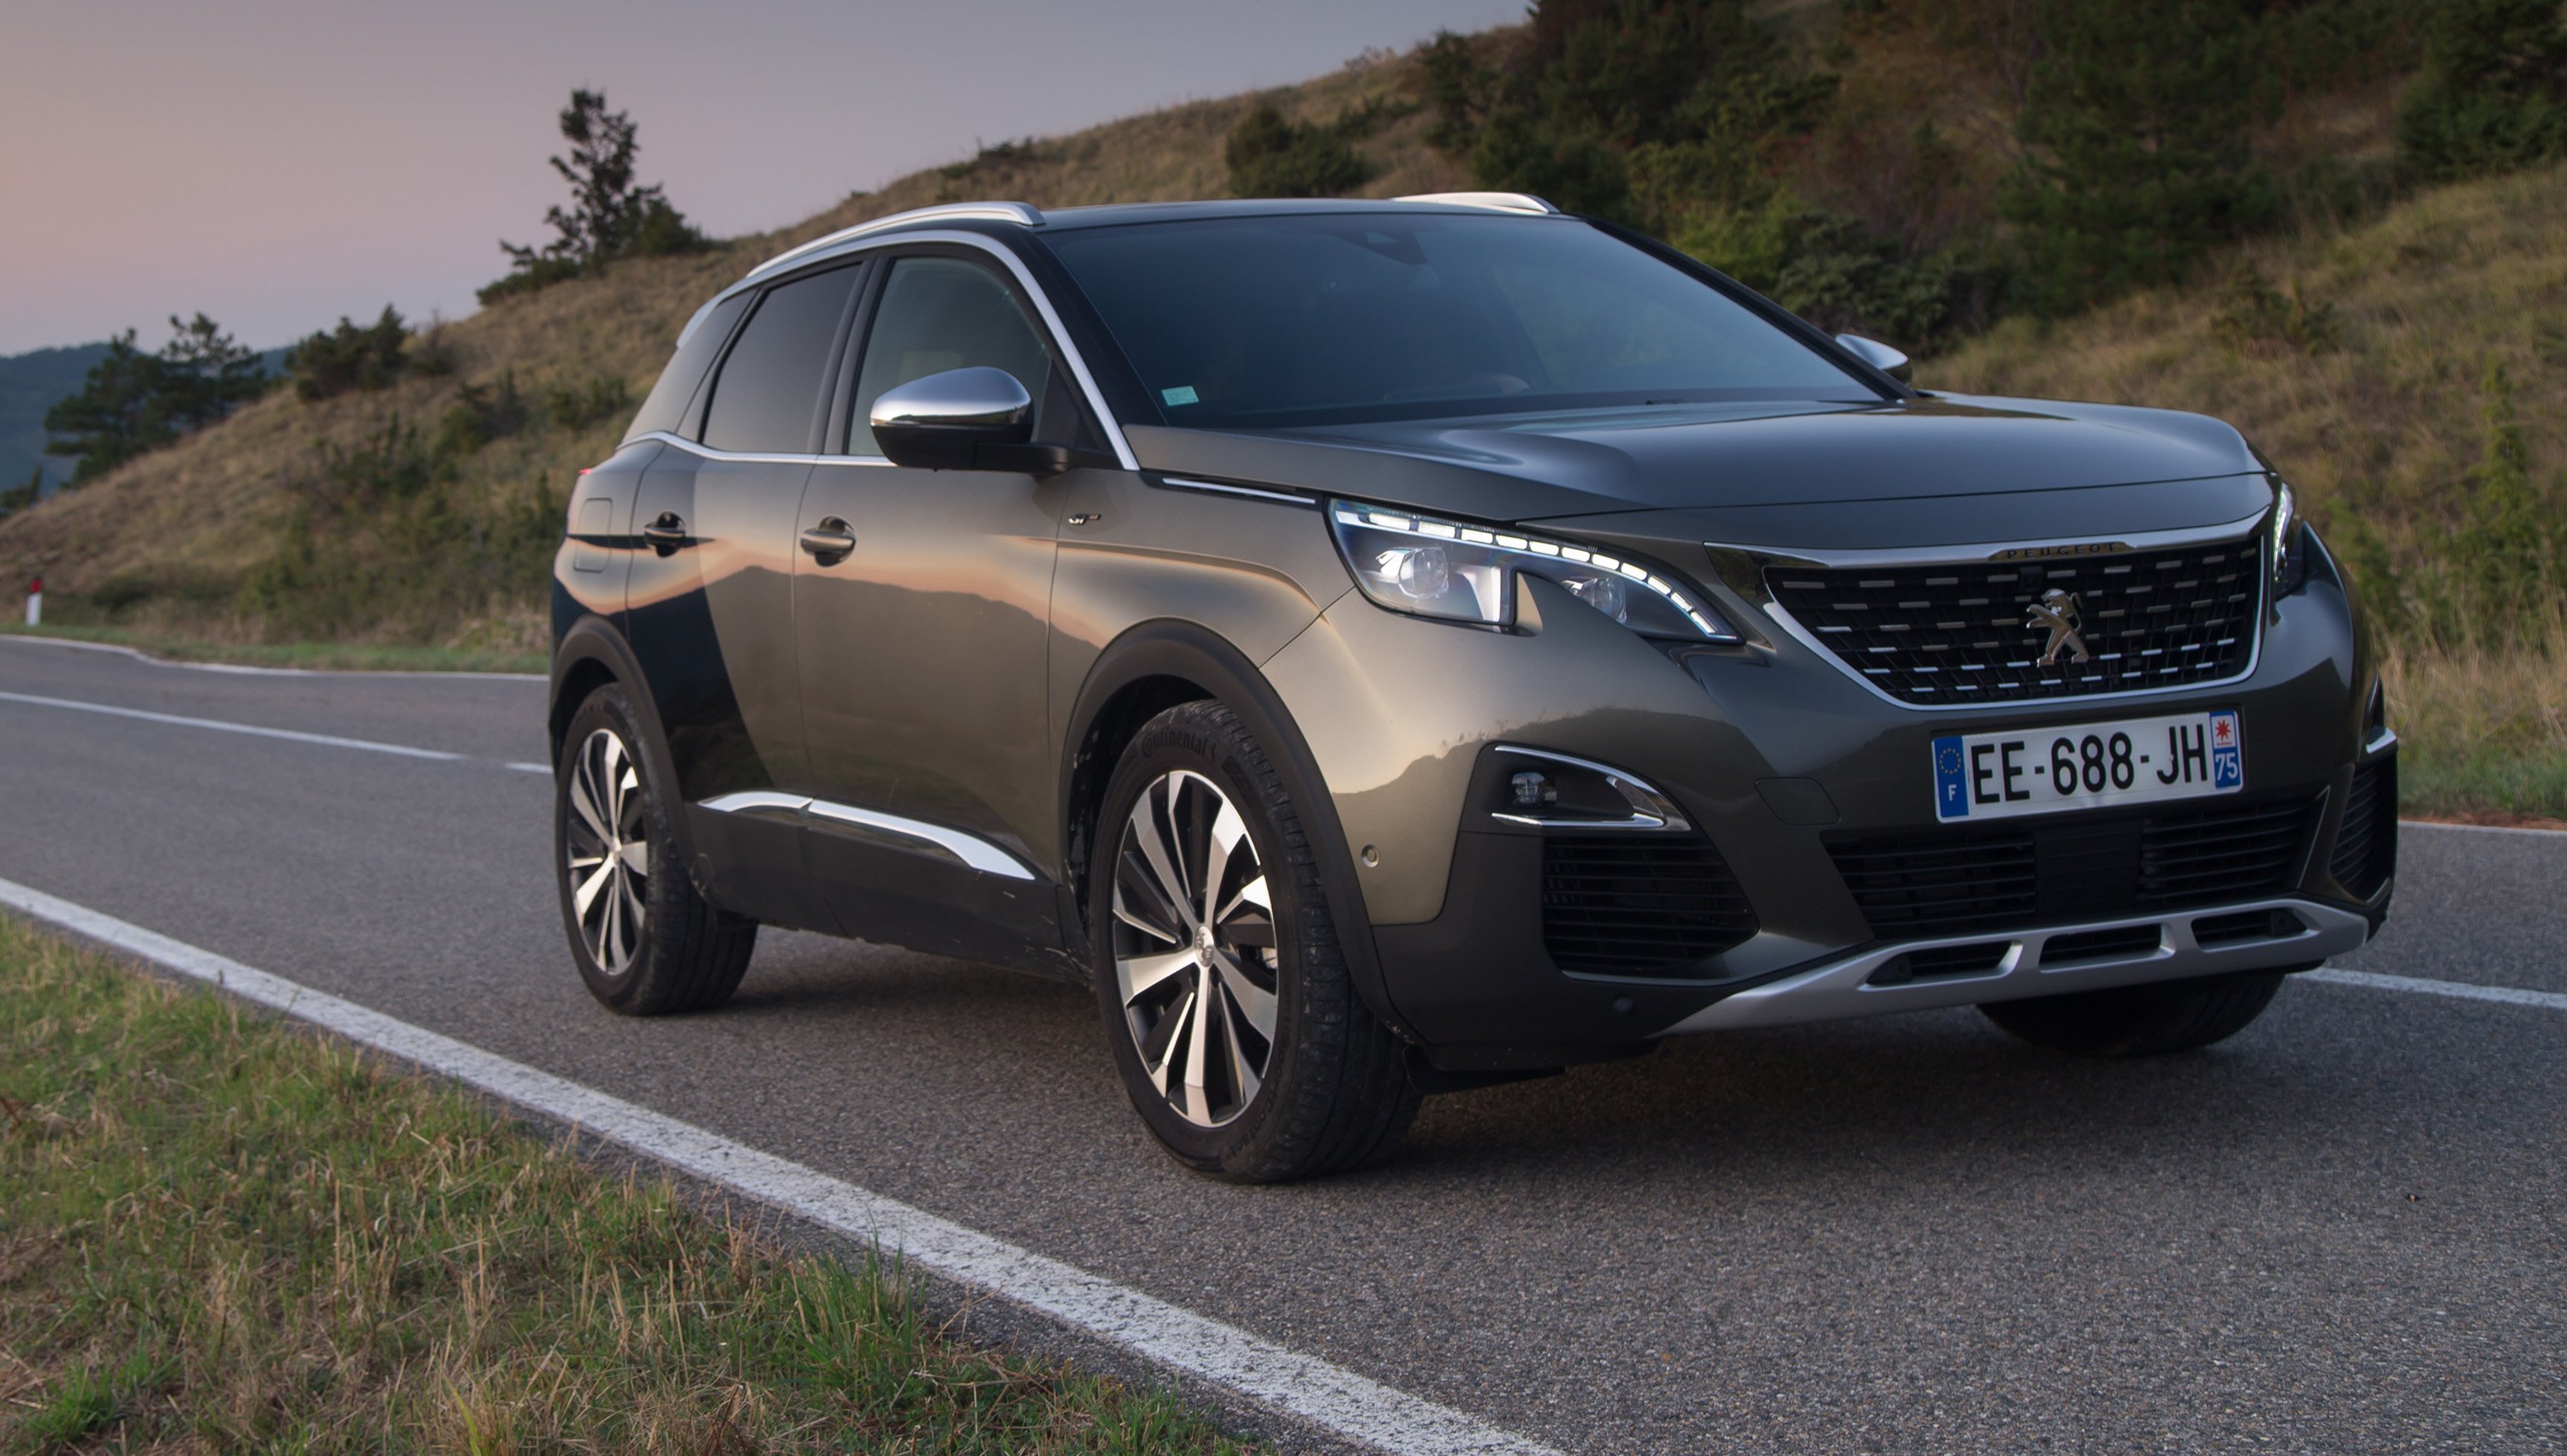 2018 Peugeot 3008 pricing and specs Newgen SUV touches